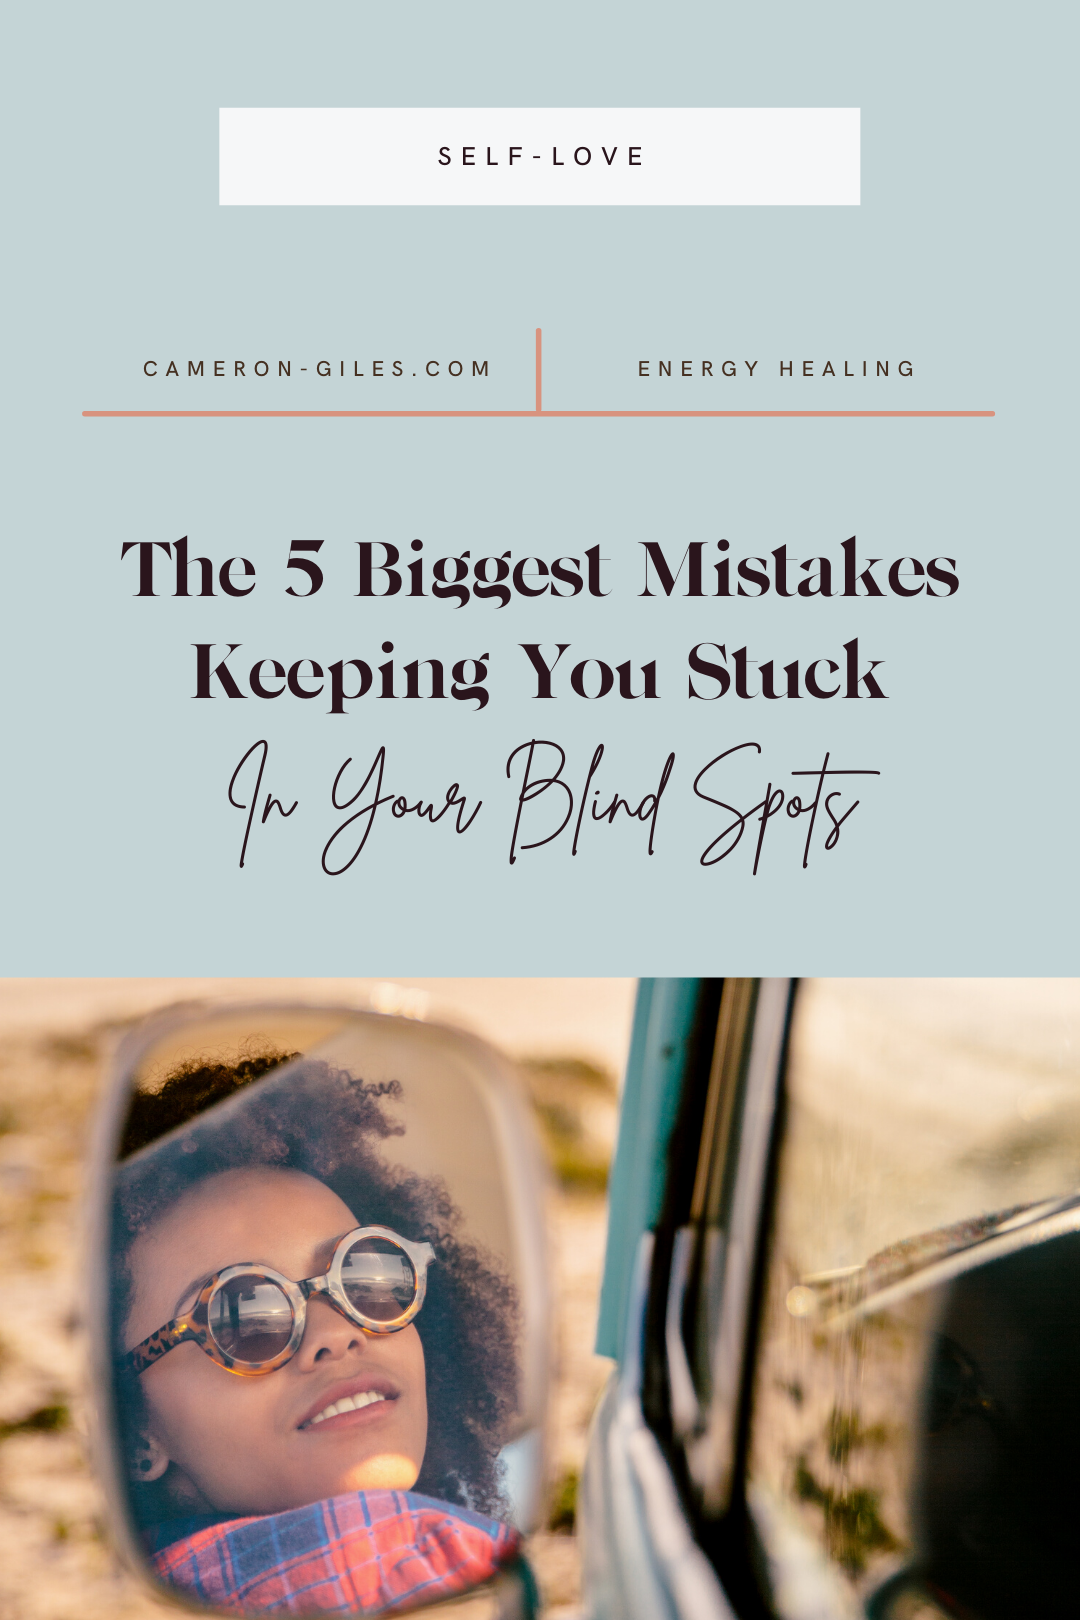 The 5 biggest mistakes keeping you stuck in your blind spots